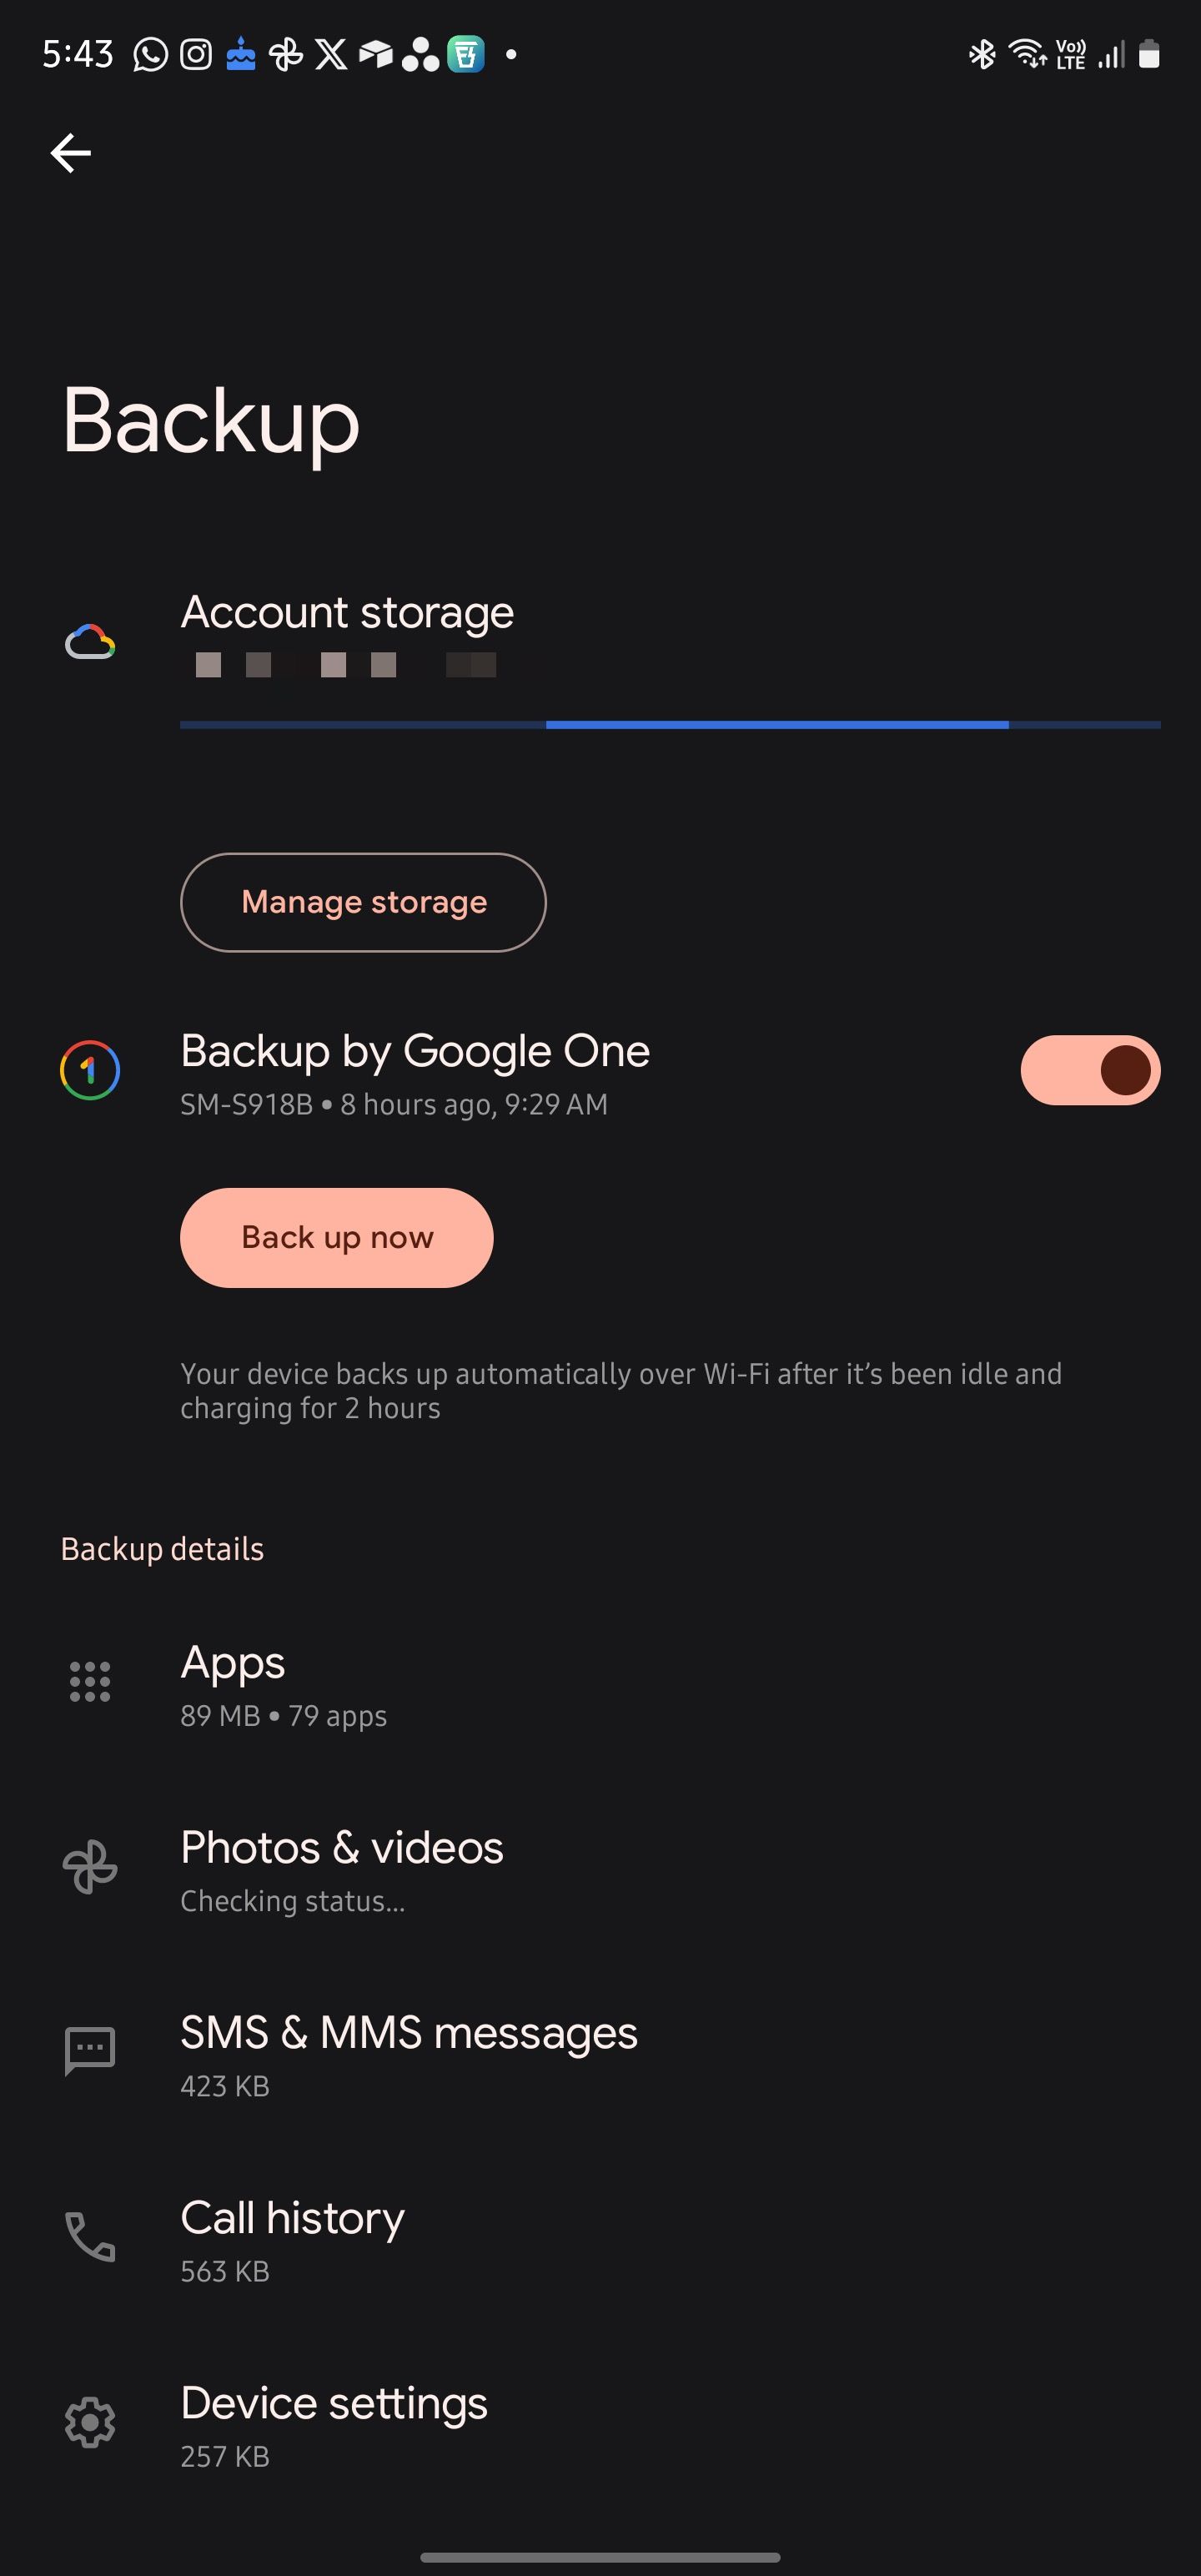 Google Drive backup for Android phone